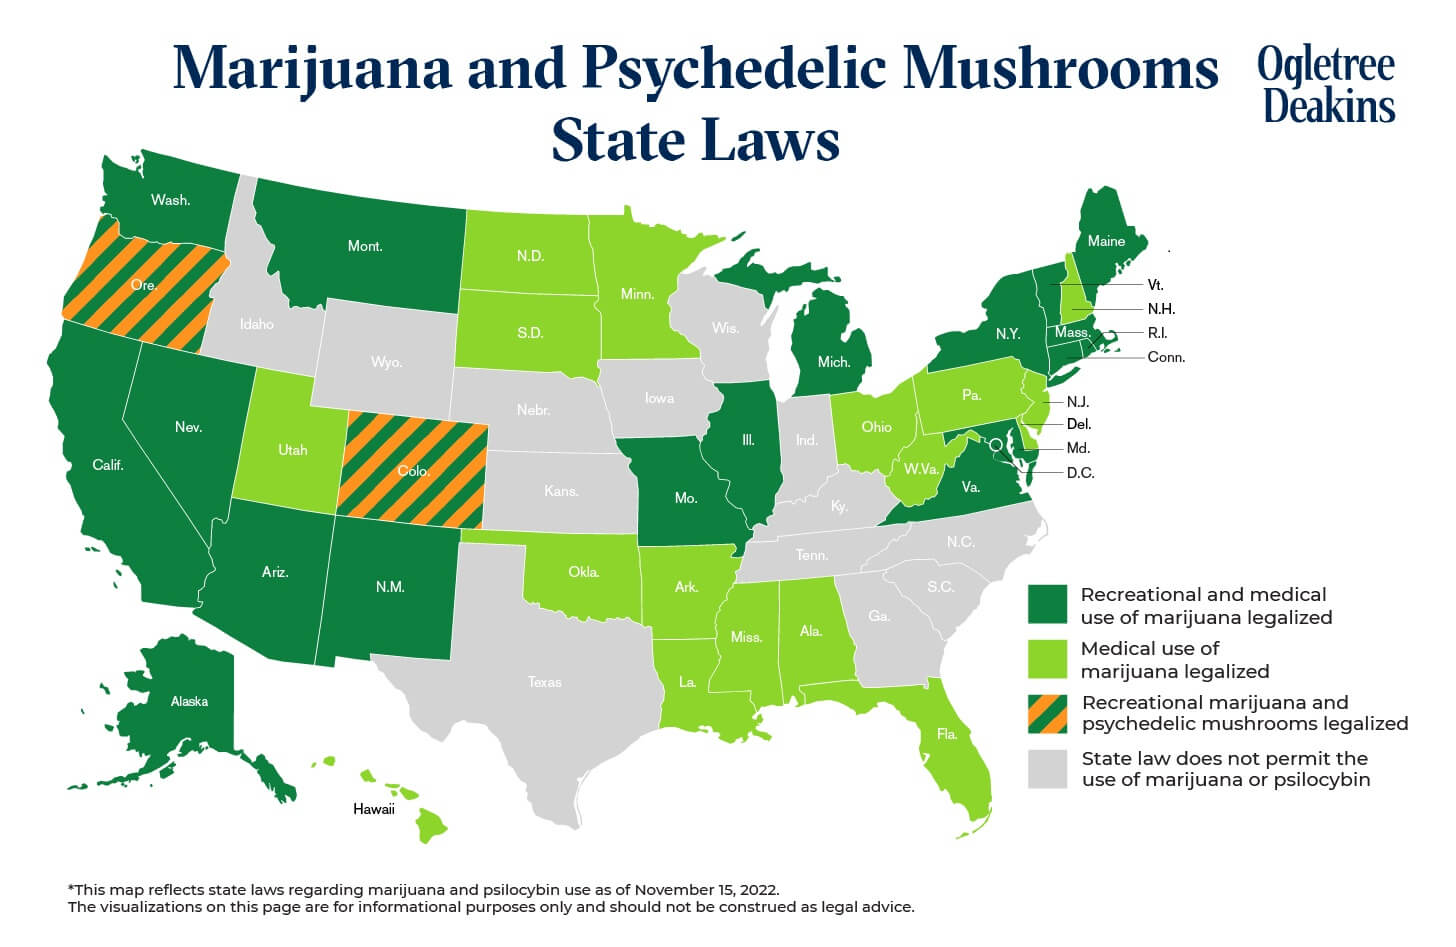 Marijuana and Psychedelic Mushrooms State Laws